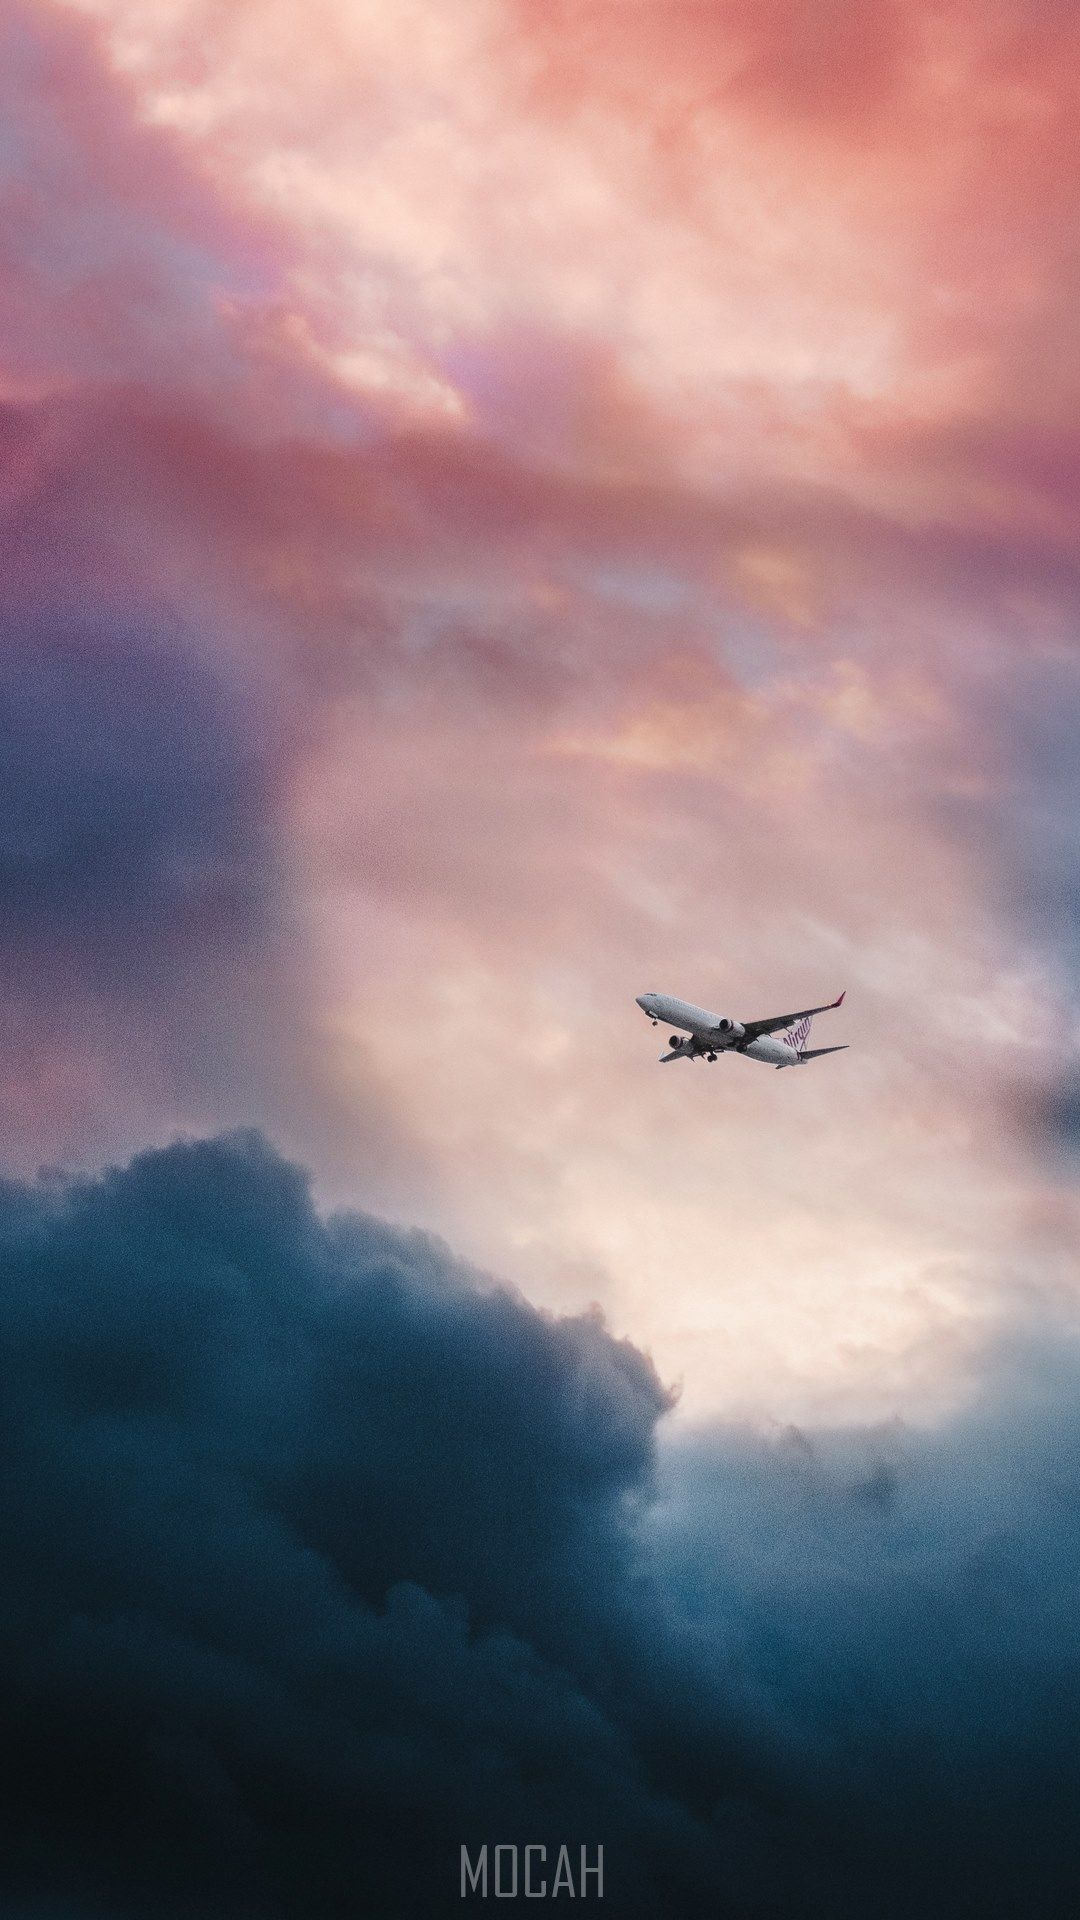 a low angle shot of an airplane in flight with sun shininguds, airplane on a twilight sky, Xiaomi Redmi Note 3 wallpaper download, 1080x1920 Gallery HD Wallpaper